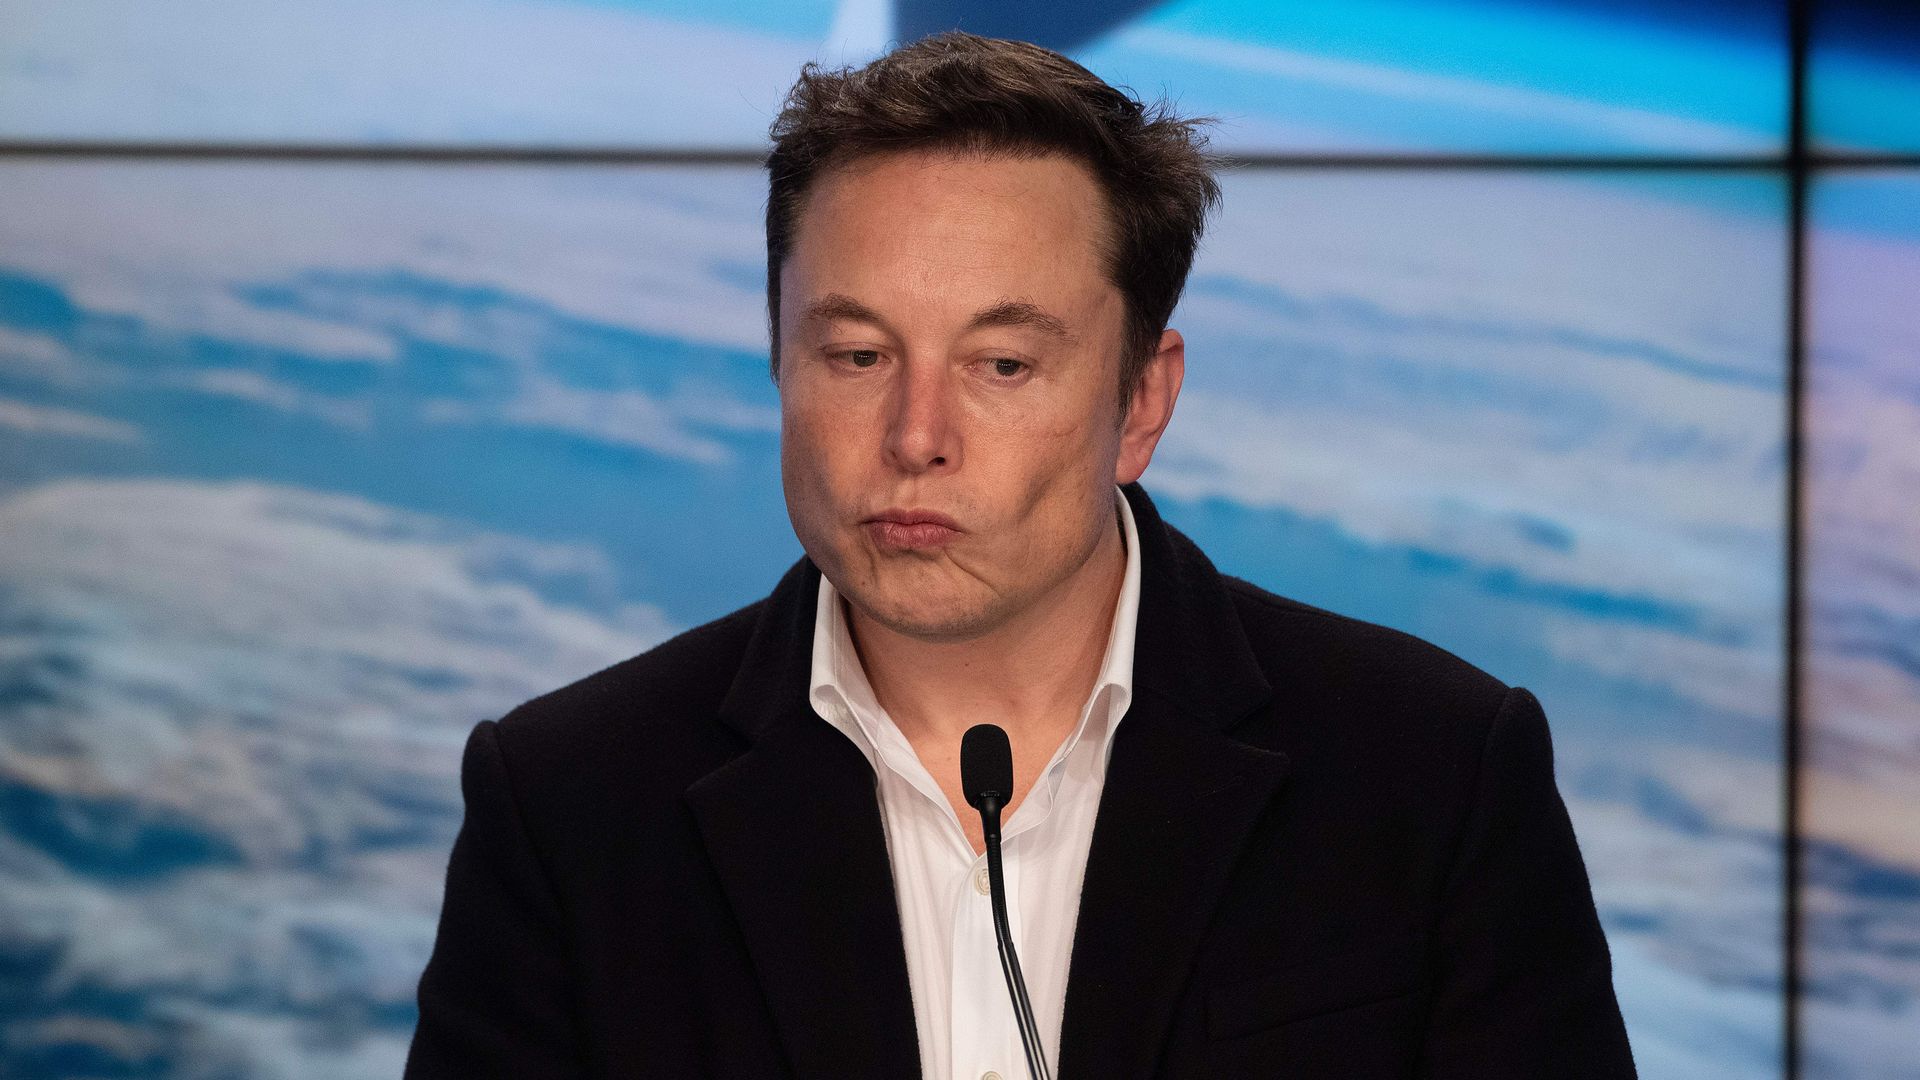 In this image, Elon Musk looks down while standing in front of a microphone. He's wearing a suit with no tie.